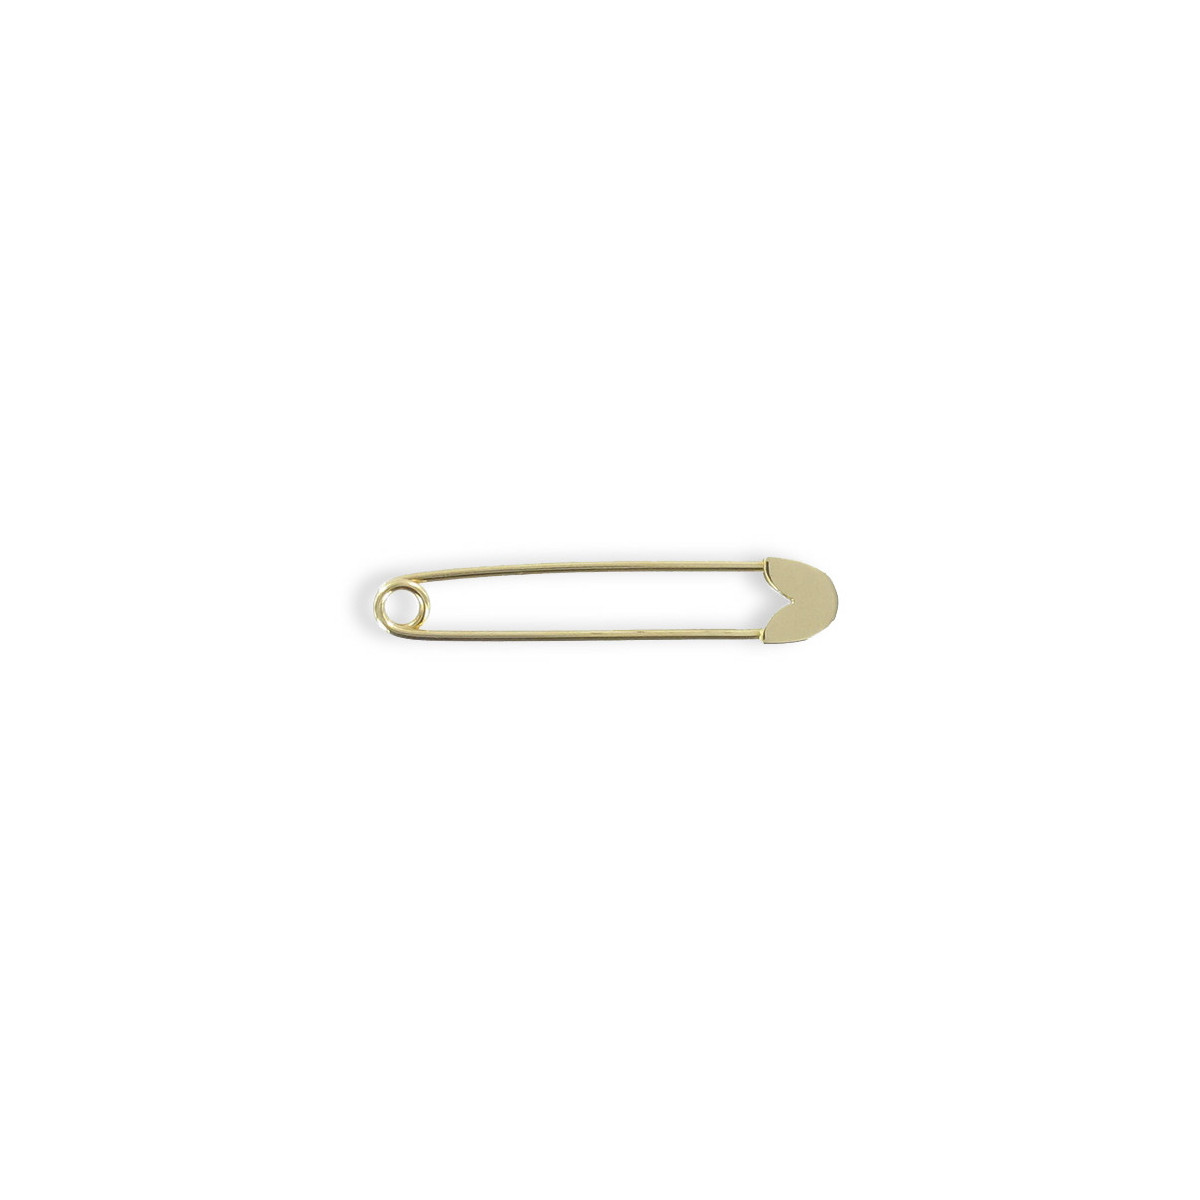 3 CM GOLD SAFETY PIN.